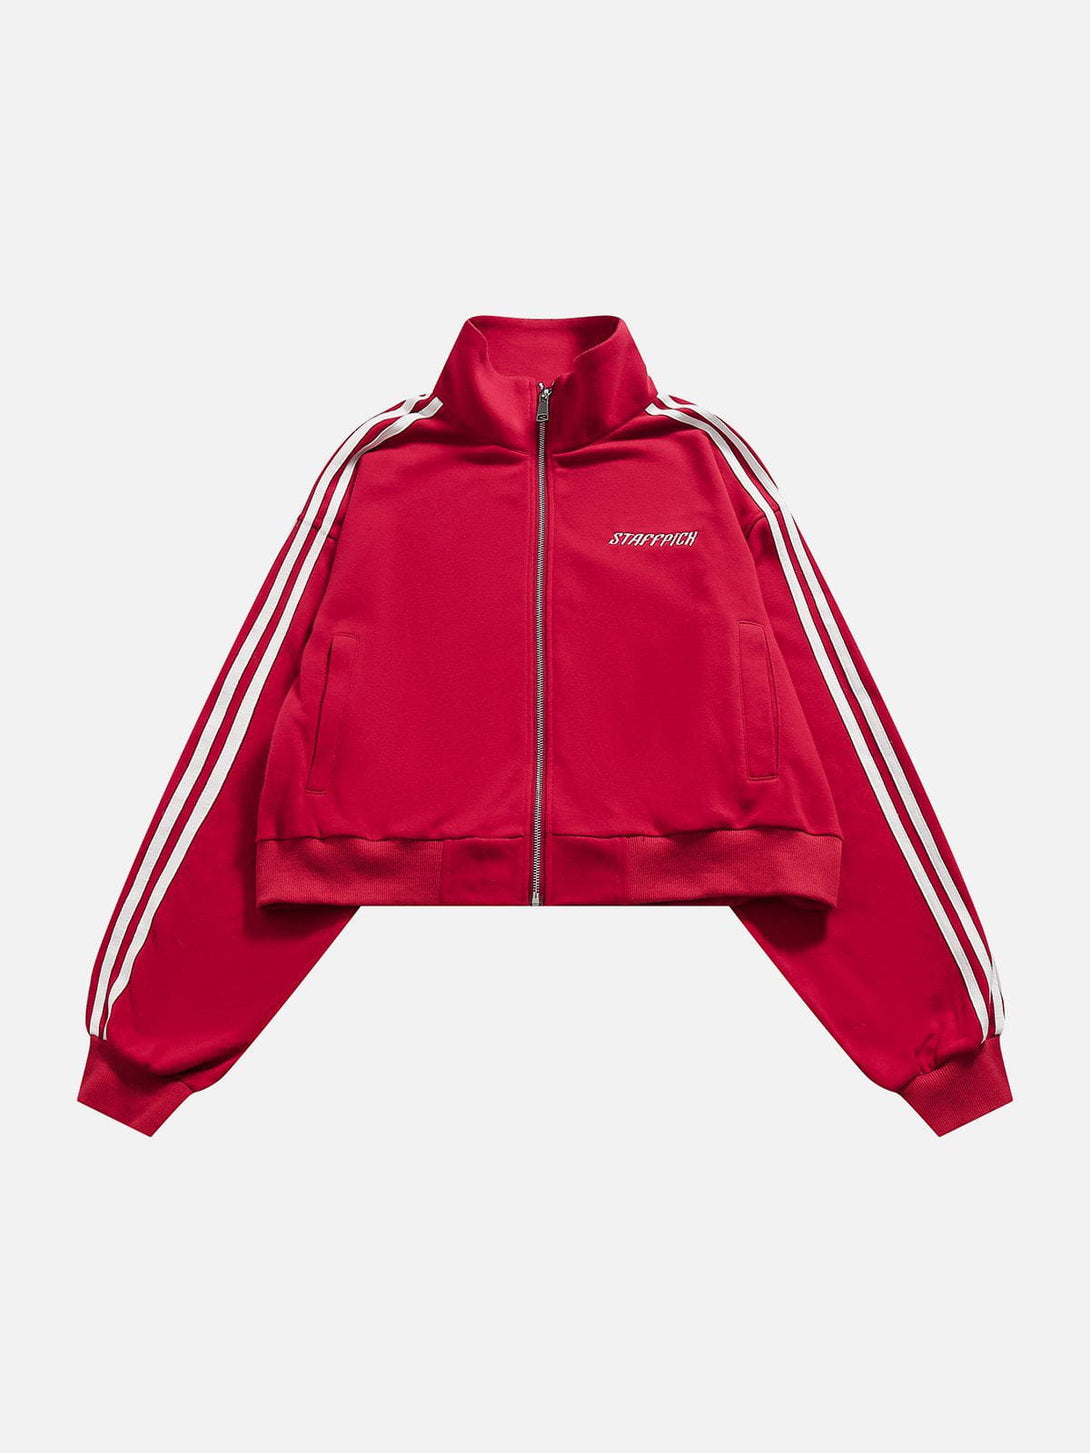 Levefly - Solid Color Jackets - Streetwear Fashion - levefly.com